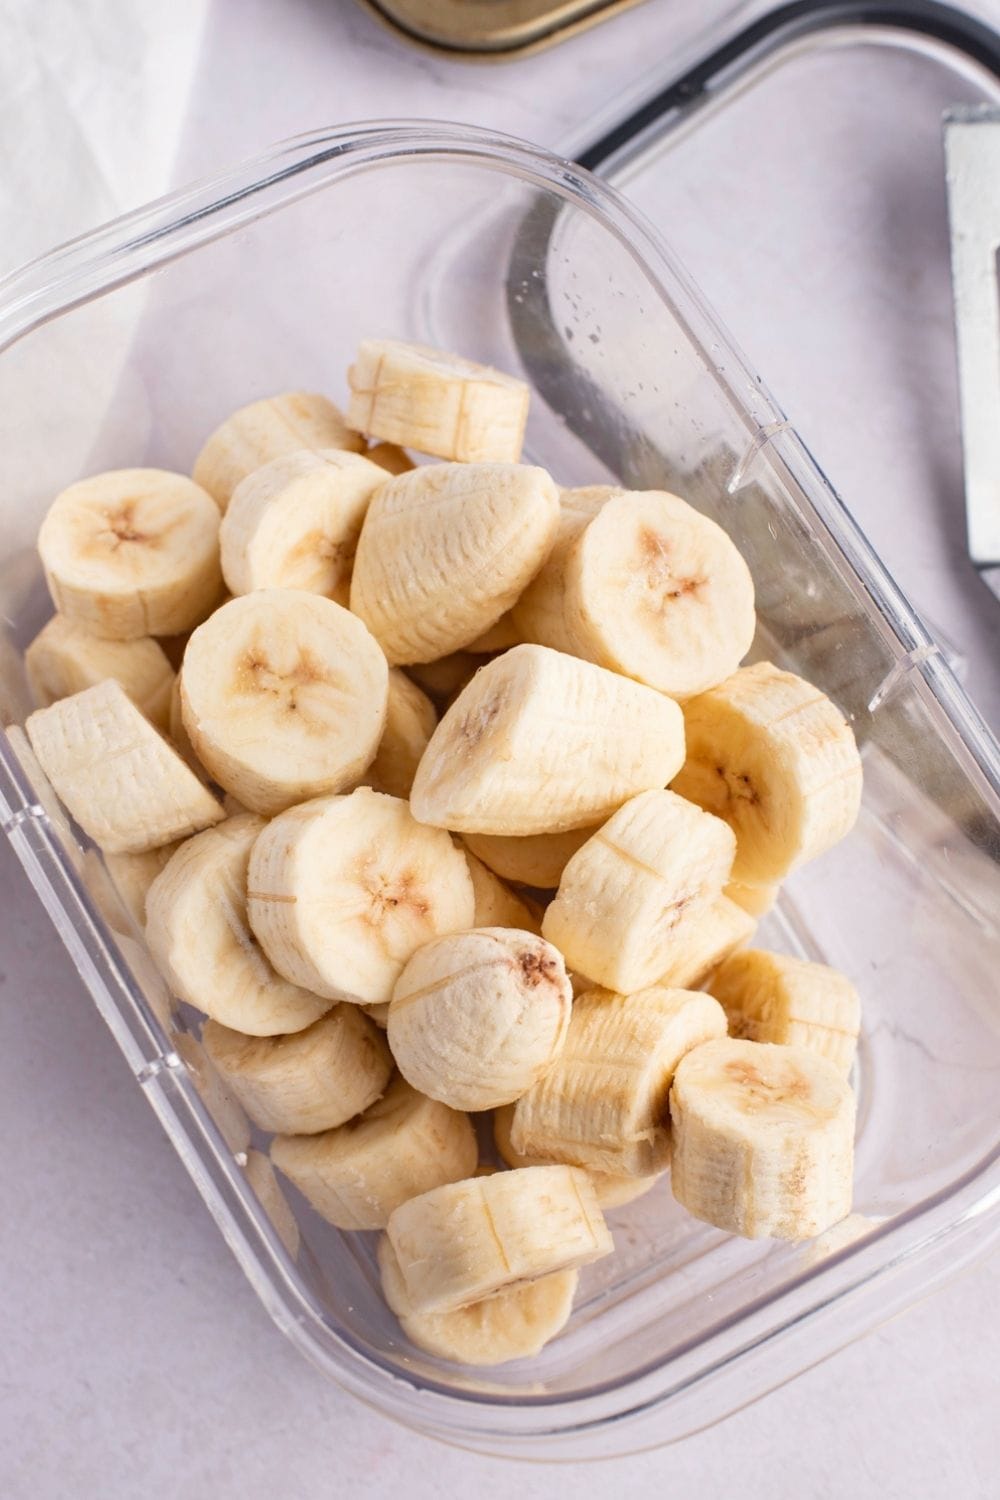 Banana Slices in a Glass Container